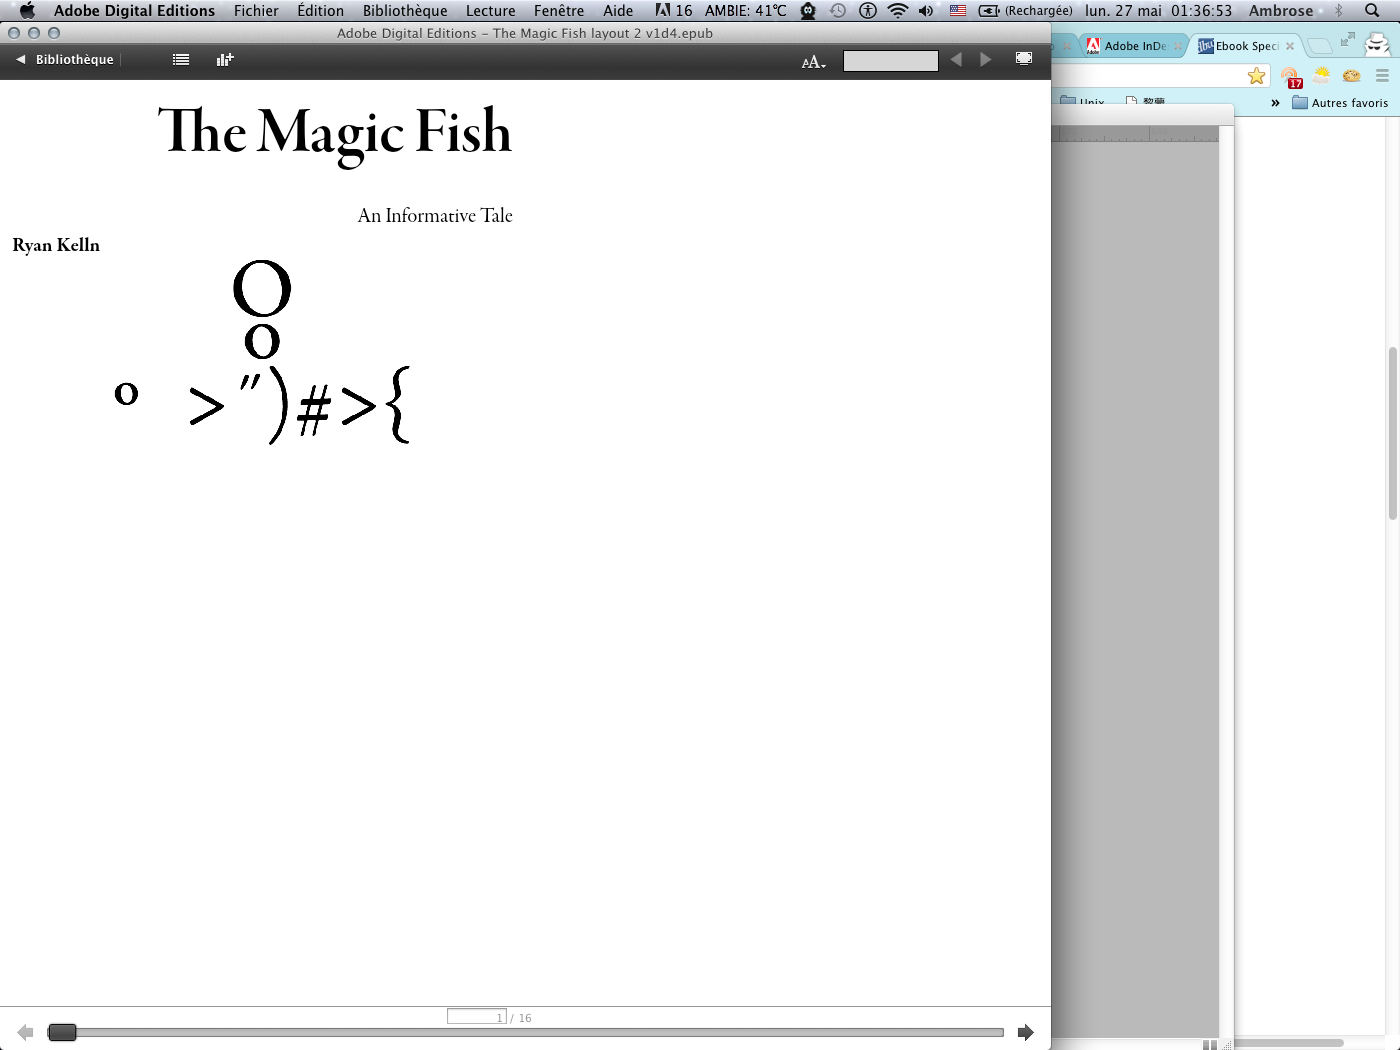 [Screen capture of Adobe Digital Editions, showing how the fish logo has been misrasterized]